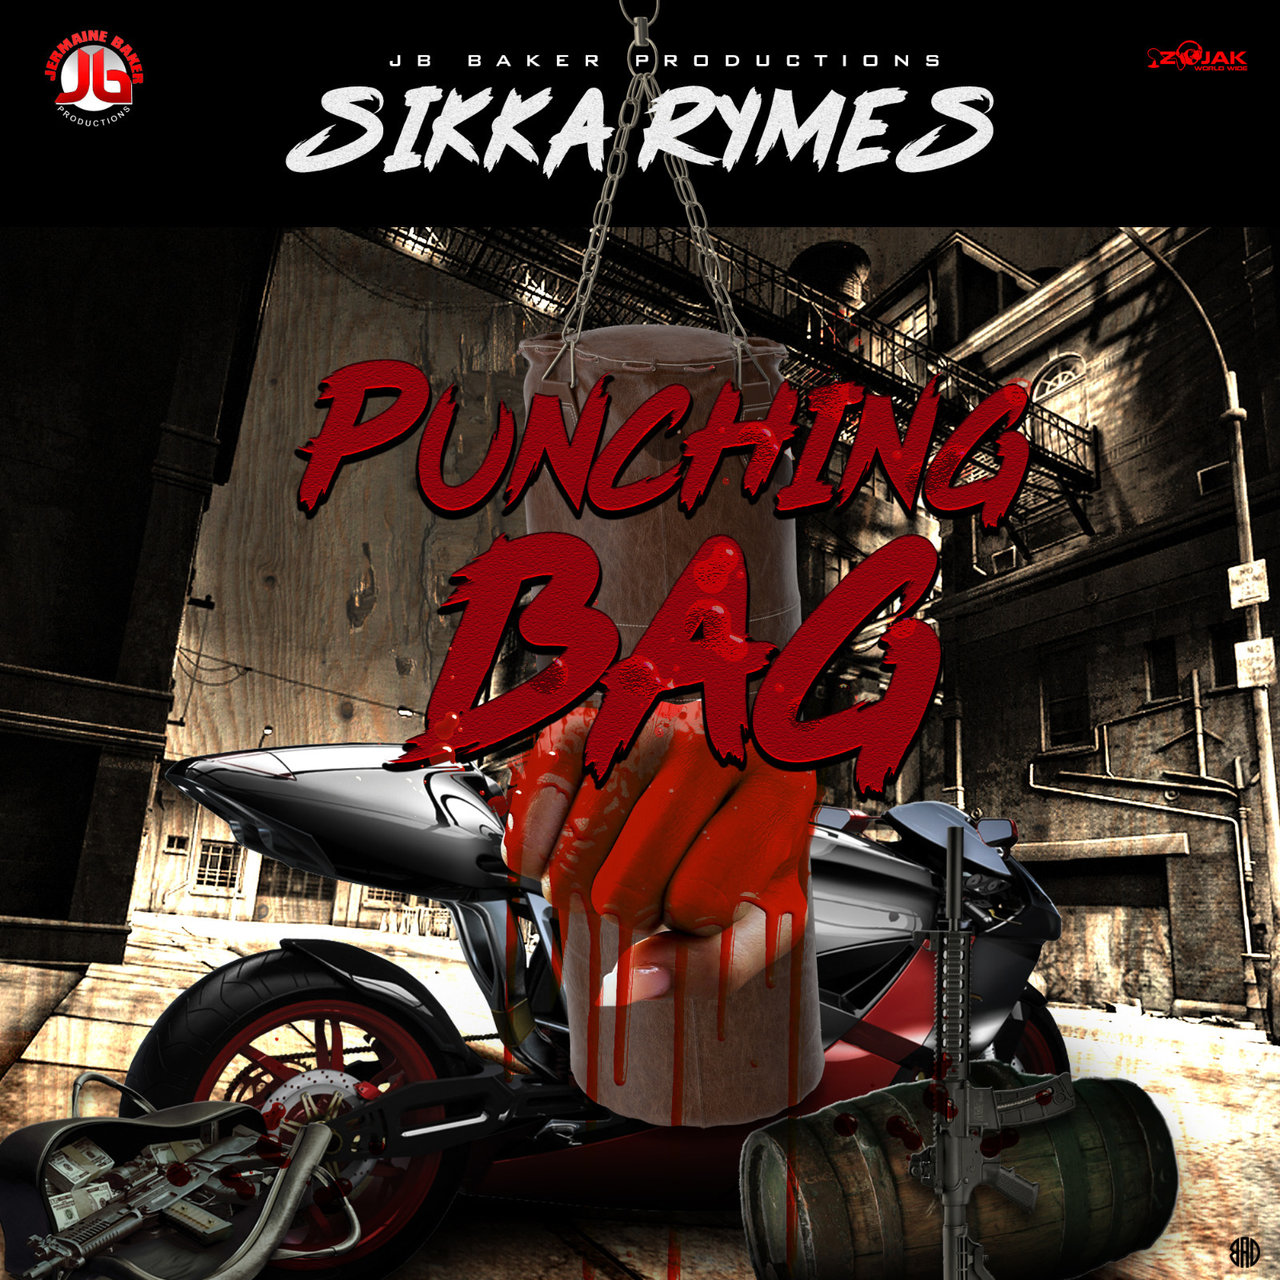 Sikka Rymes - Punching Bag (Cover)